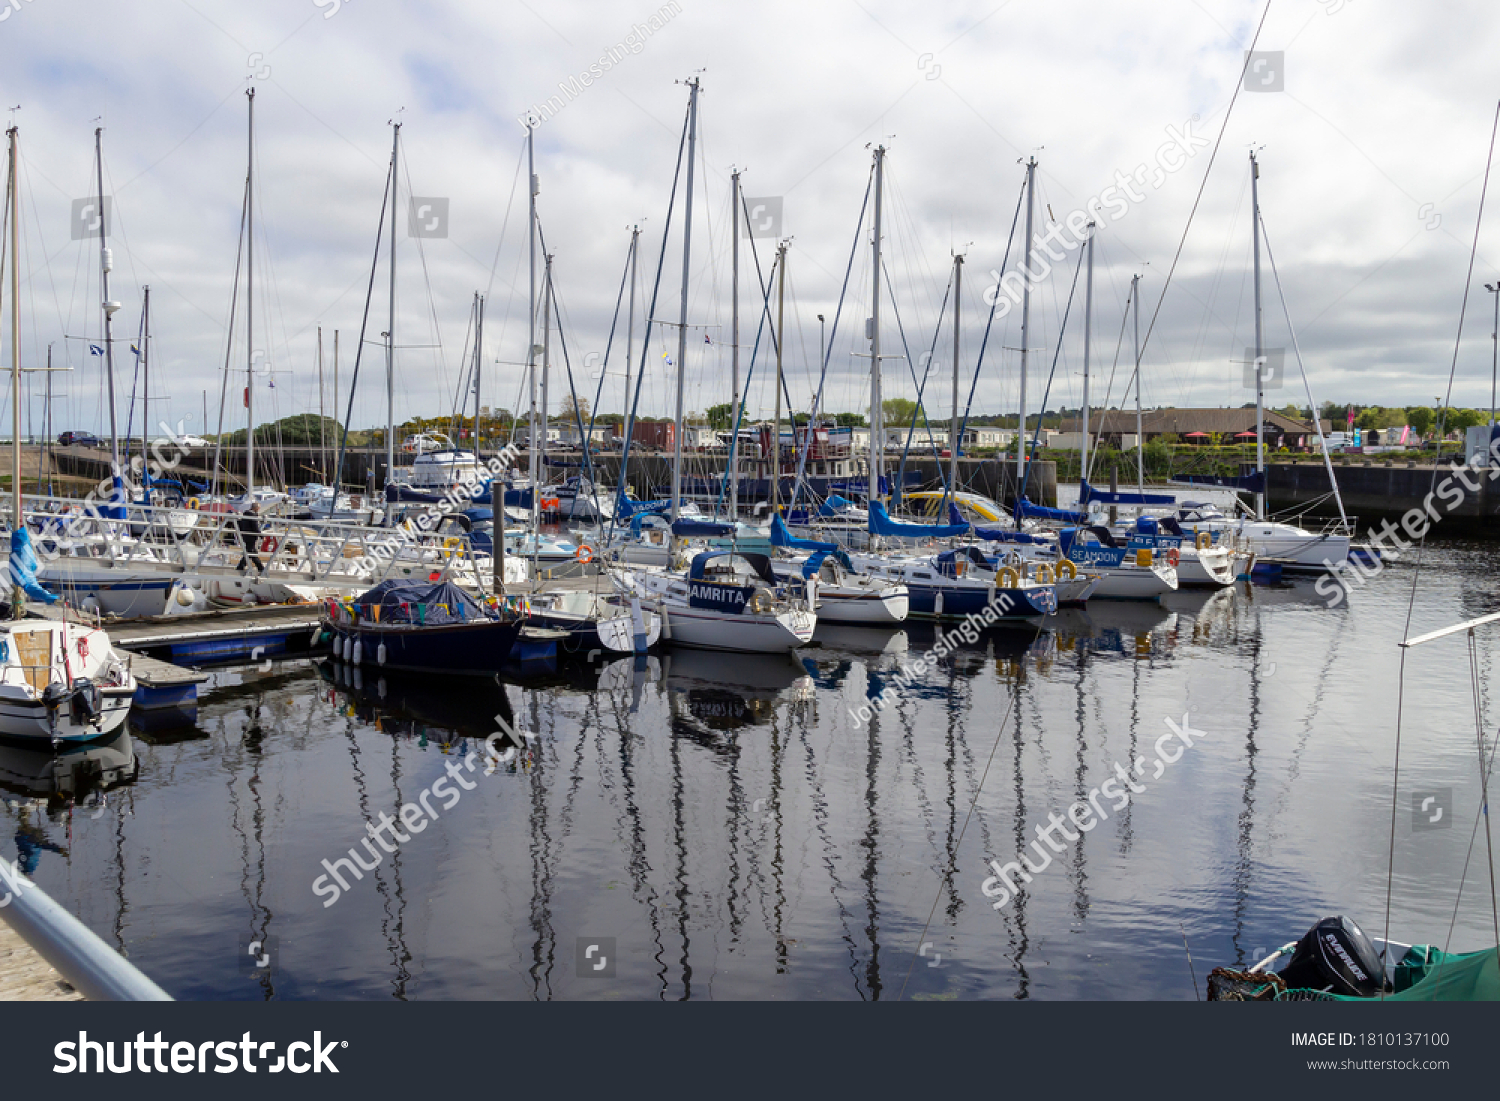 Nairn, Highlands, Scotland, UK - June 01, 2016: View of Nairn harbour in the Highlands of Scotland showing moored yachts. #1810137100